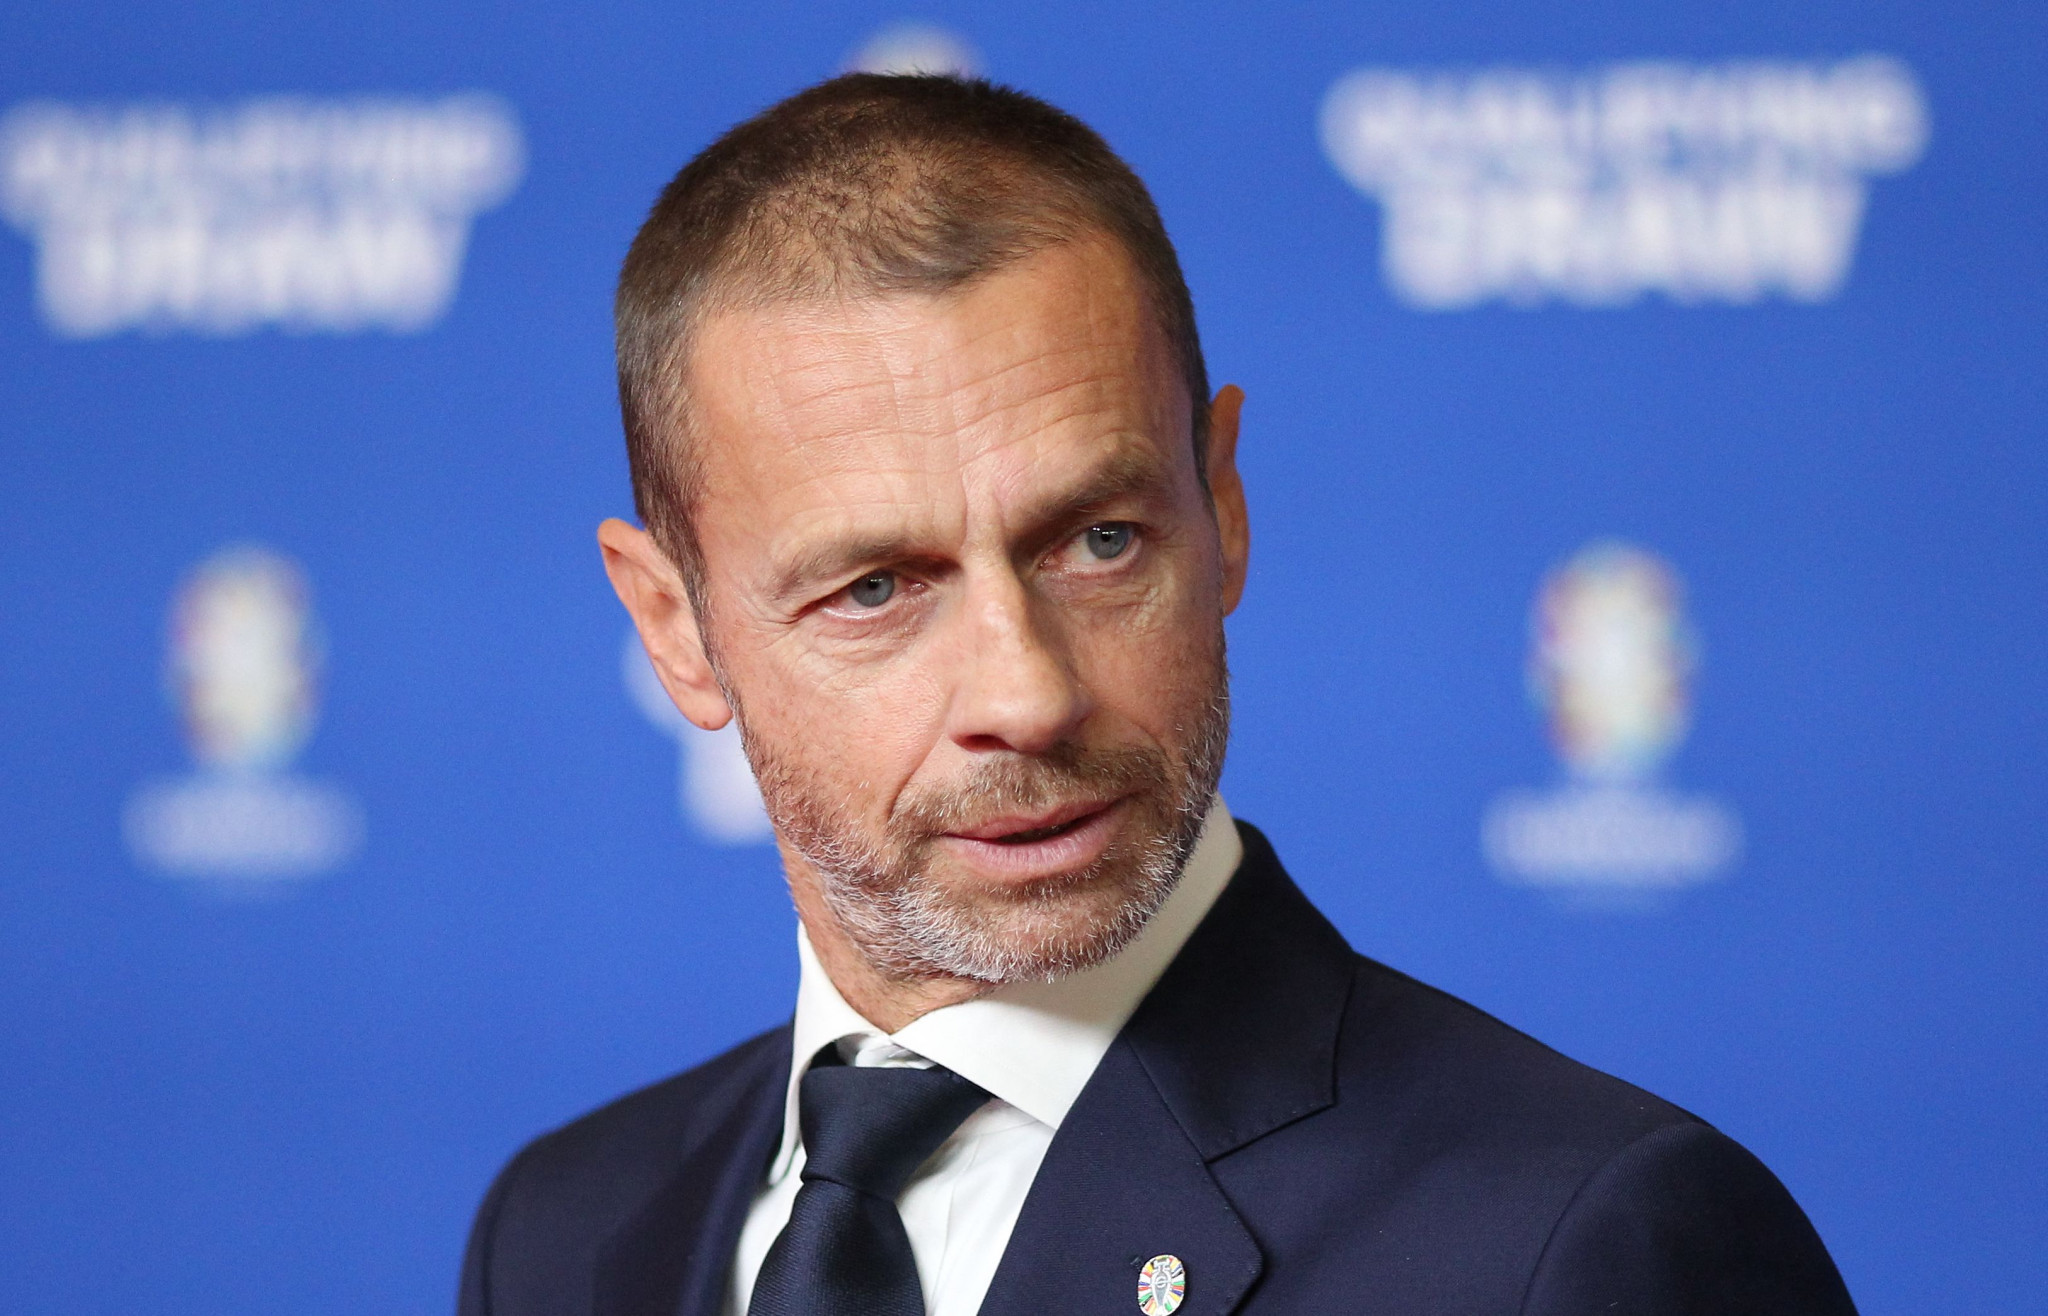 UEFA President Aleksander Čeferin confirmed that Belarus' position is set to be discussed at next month's Executive Committee meeting ©Getty Images